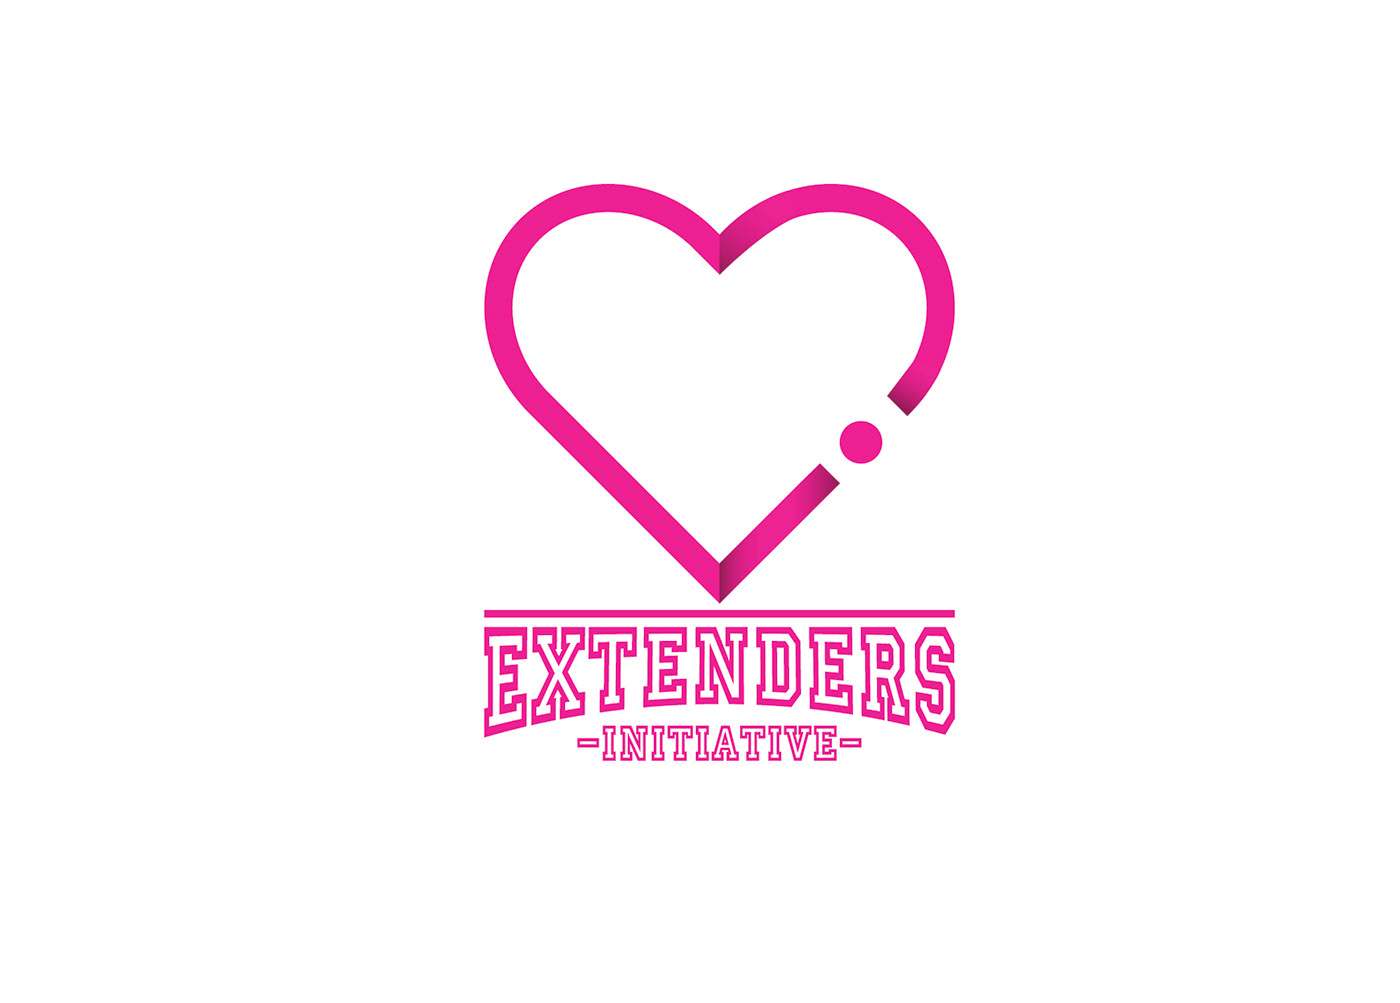 Extenders Initiative: Brand billboard logos posters Photography  videography manipulation graphic design 